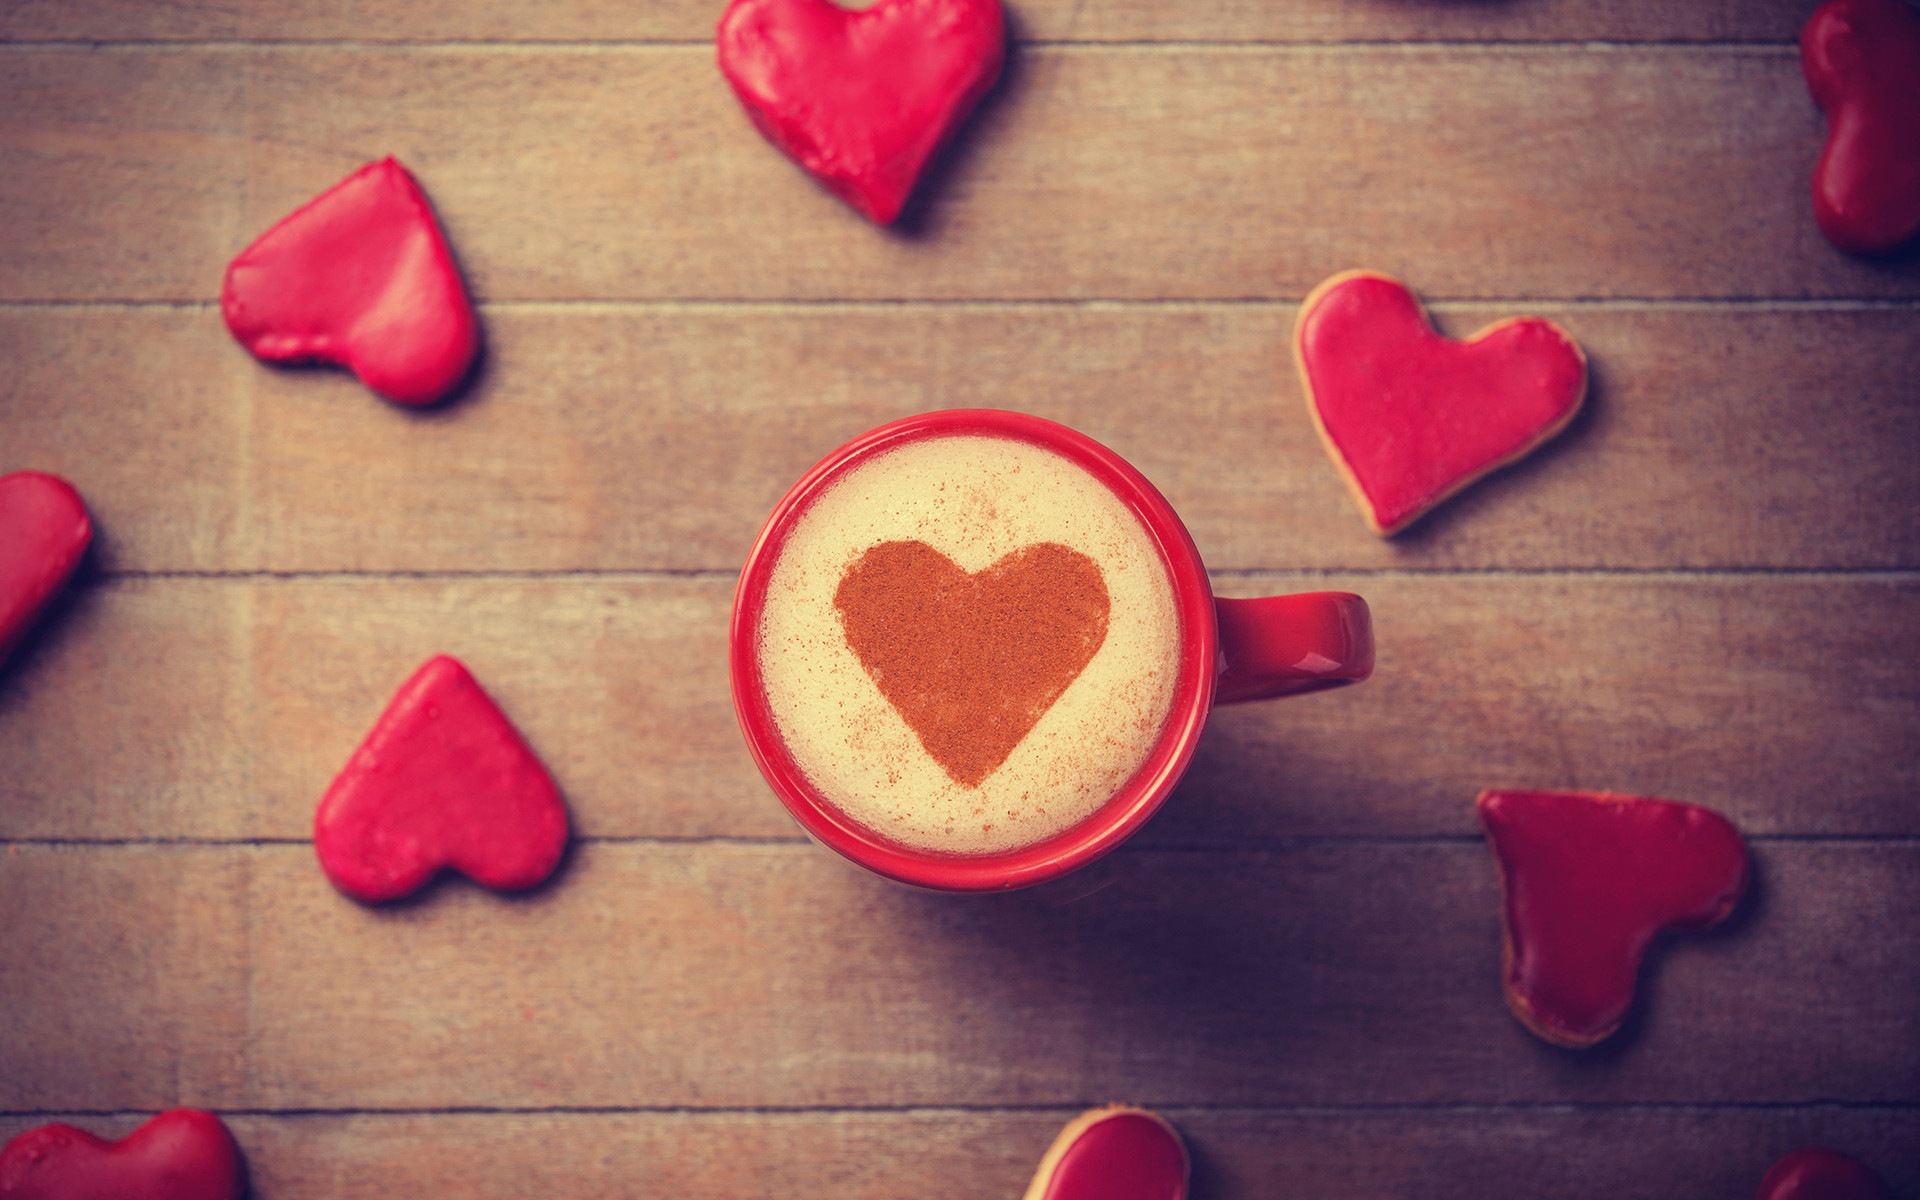 The theme of love, creative heart-shaped HD wallpapers #1 - 1920x1200